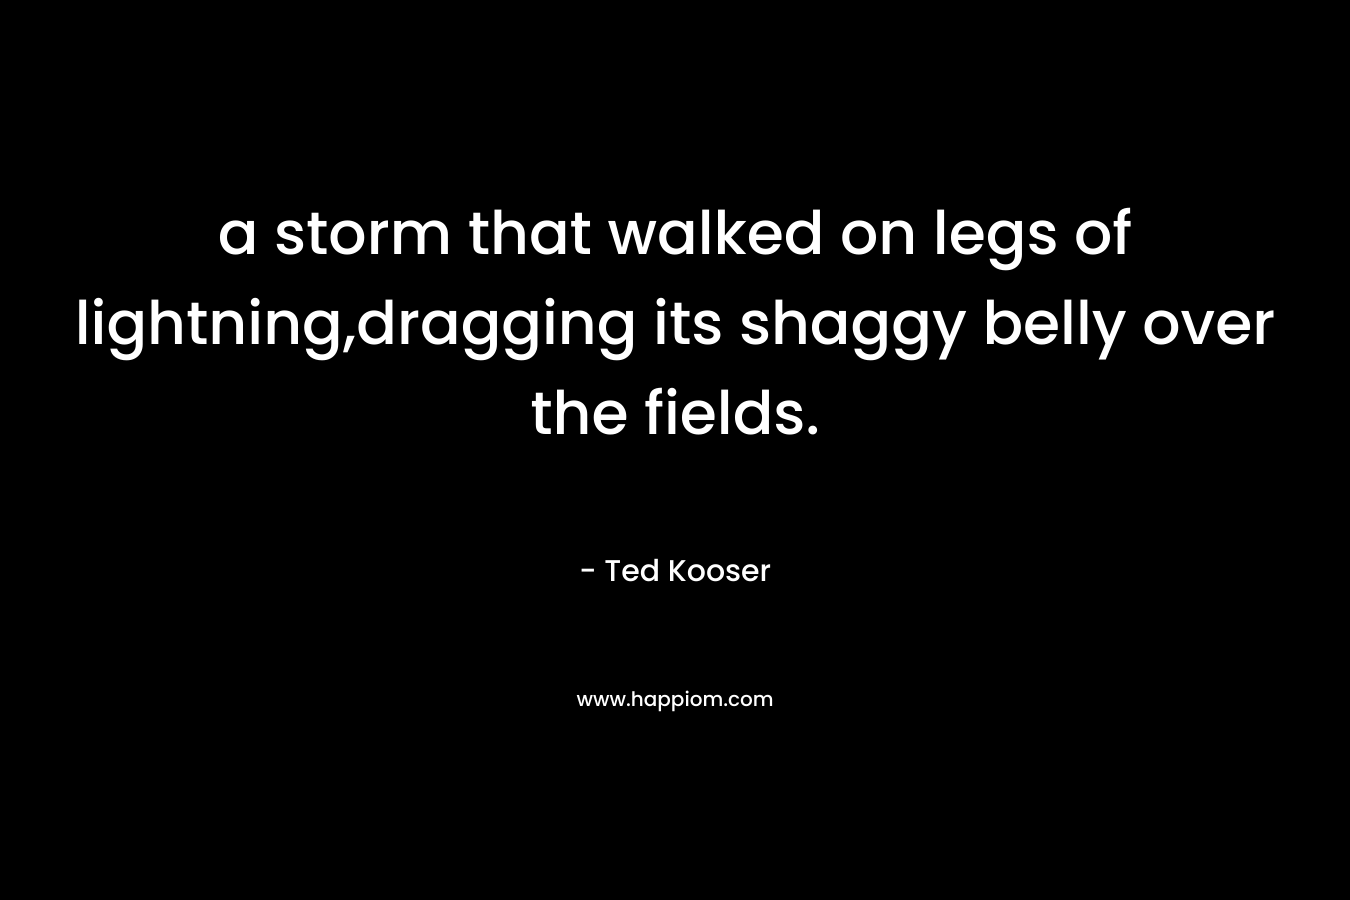 a storm that walked on legs of lightning,dragging its shaggy belly over the fields. – Ted Kooser